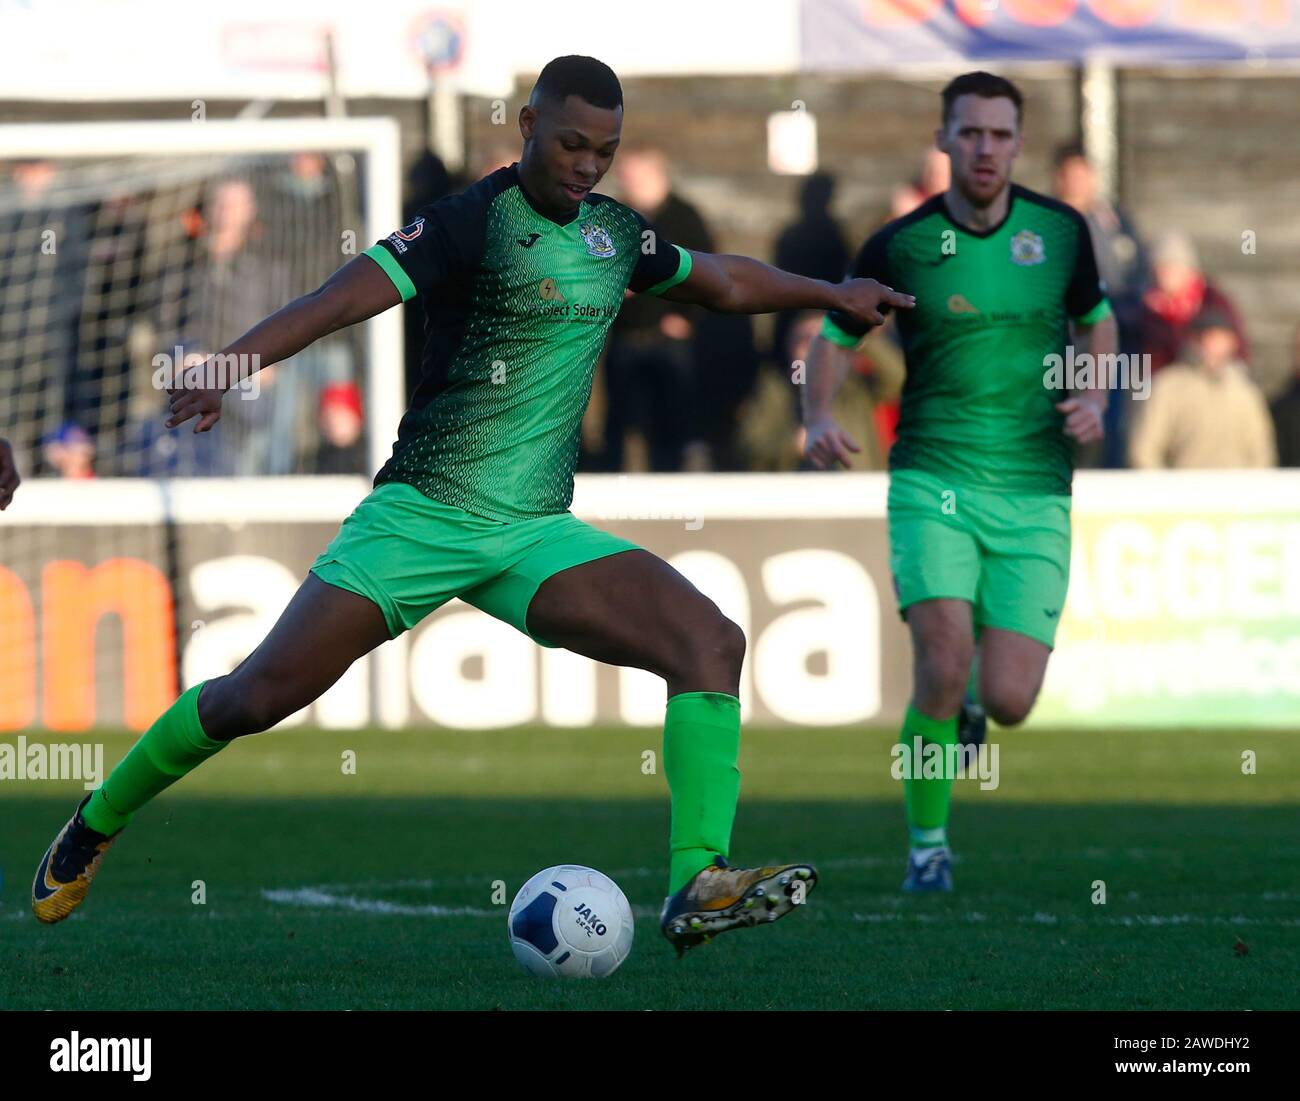 London, UK. 08th Feb, 2020. DAGENHAM, ENGLAND. FEBRUARY 08: Nyal Bell of Stockport County during National League match between Dagenham and Redbridge FC and Stockport County at The Chigwell Construction Stadium in Dagenham, England on February 08, 2020 Credit: Action Foto Sport/Alamy Live News Stock Photo